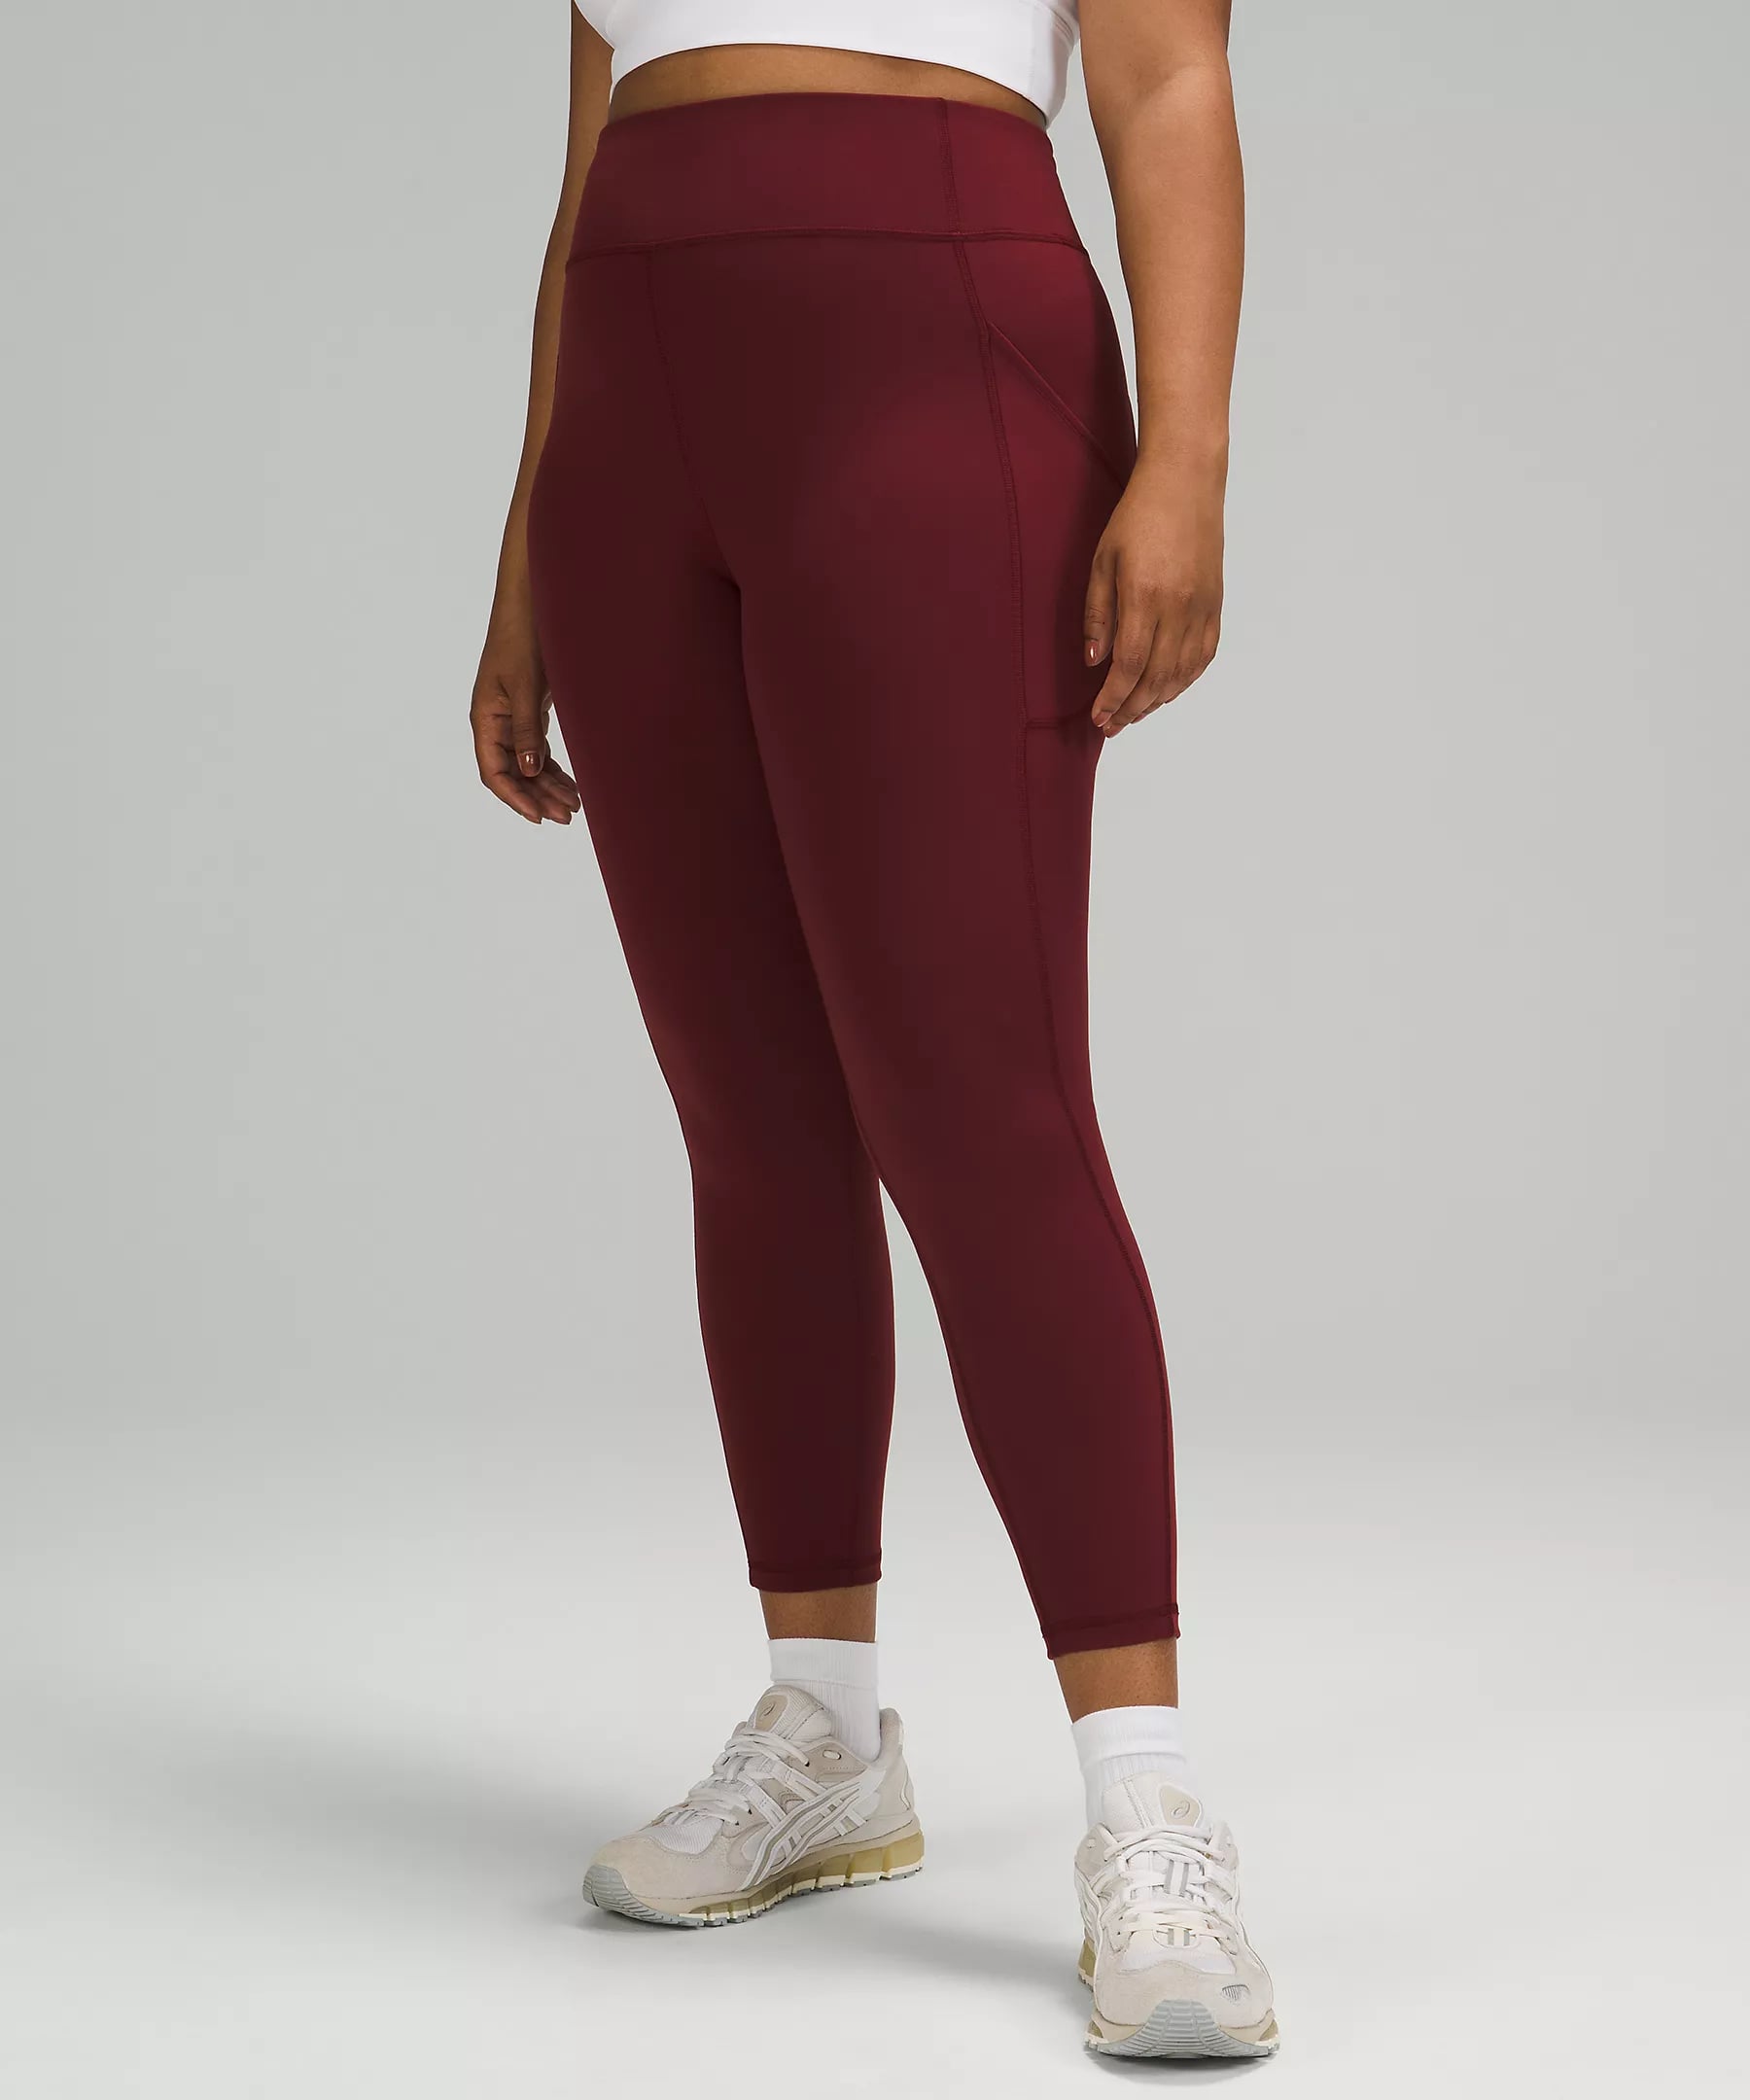 Lululemon Wunder Train HR Crop Tight - 23 with Pockets - Retail Water Drop, - Lululemon clothing